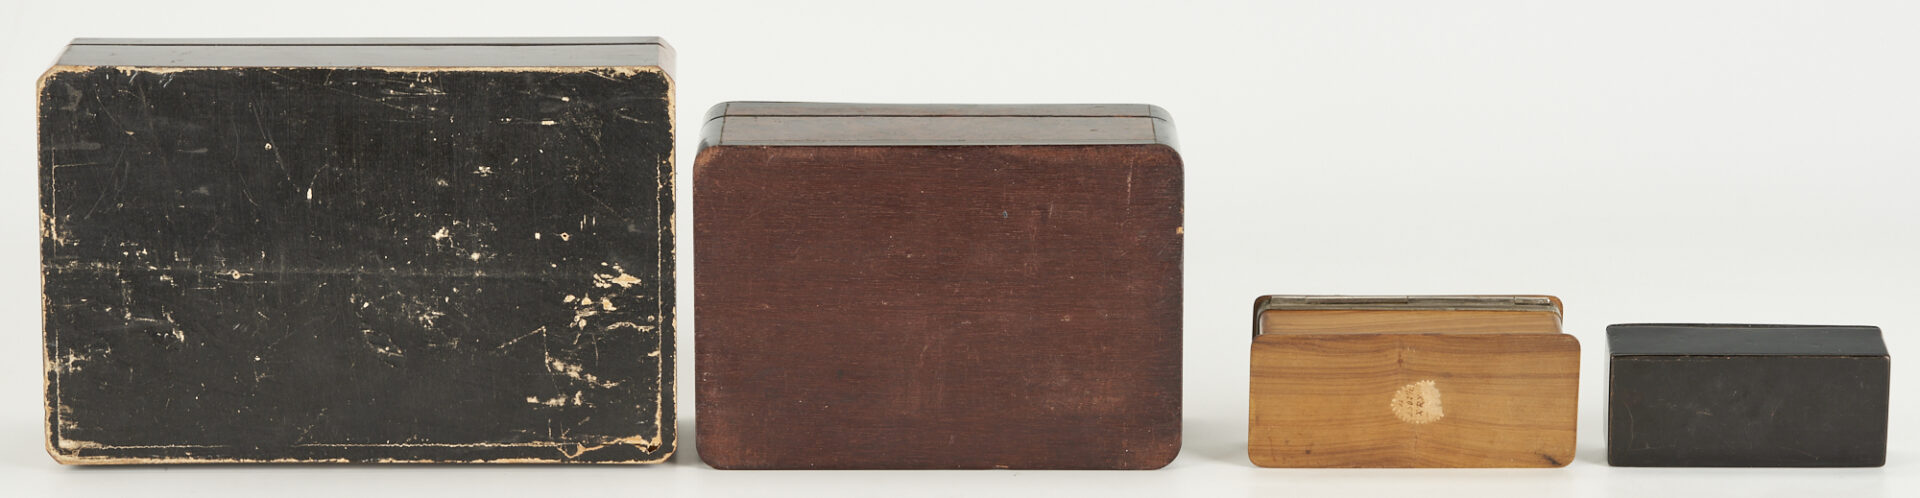 Lot 610: 4 European Wood Boxes, incl. Stamp Box